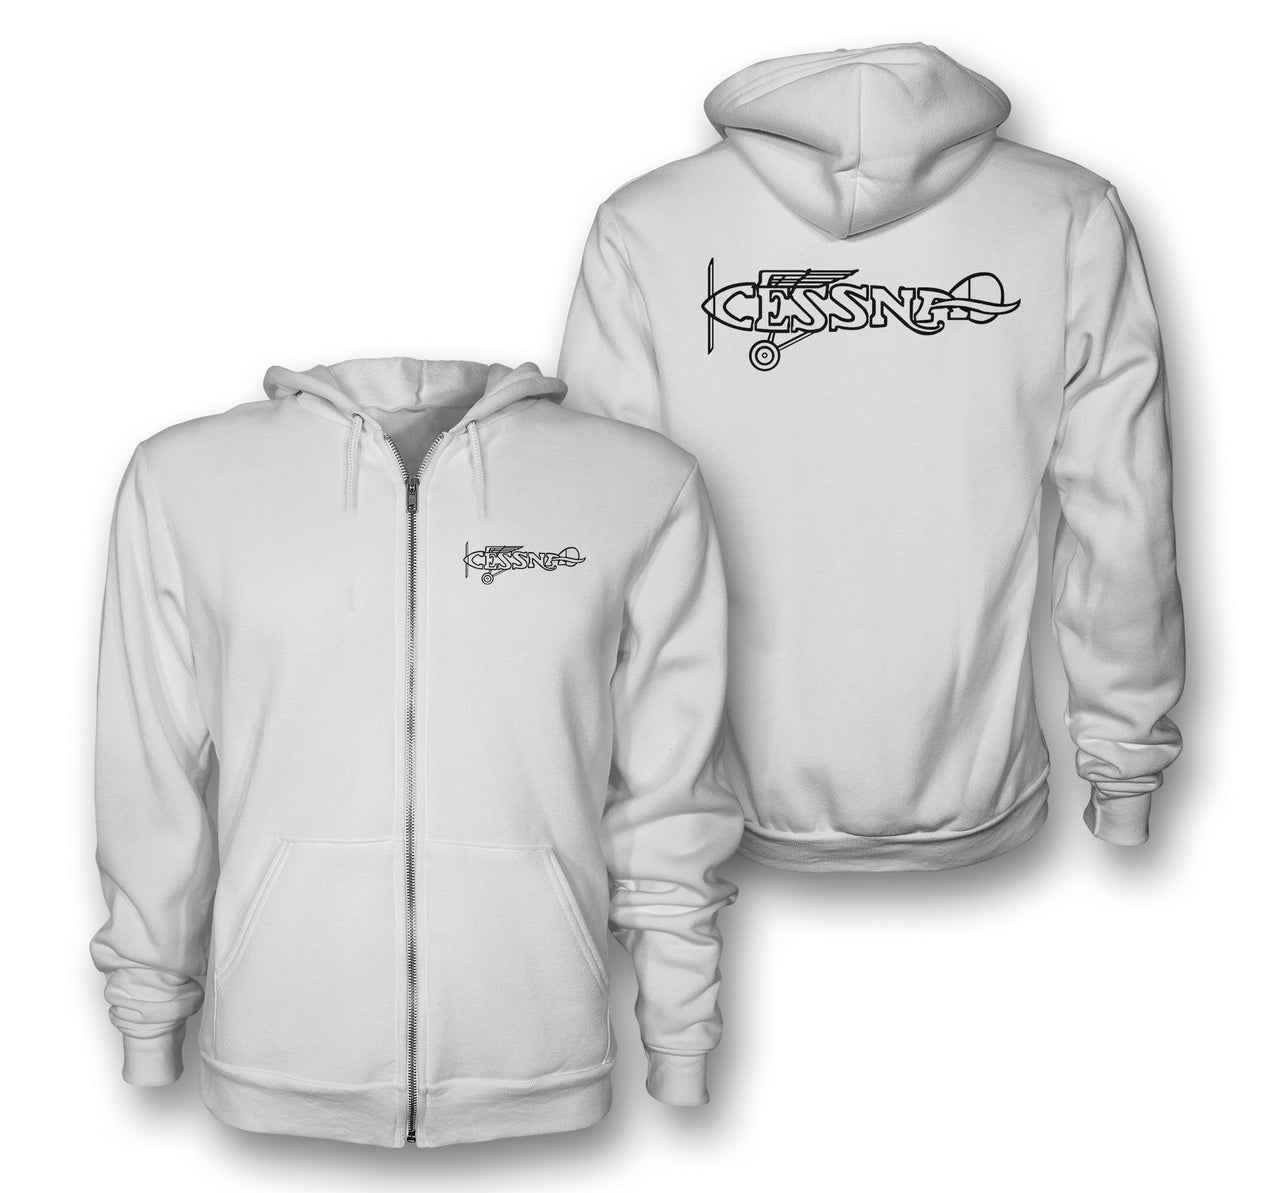 Special Cessna Text Designed Zipped Hoodies